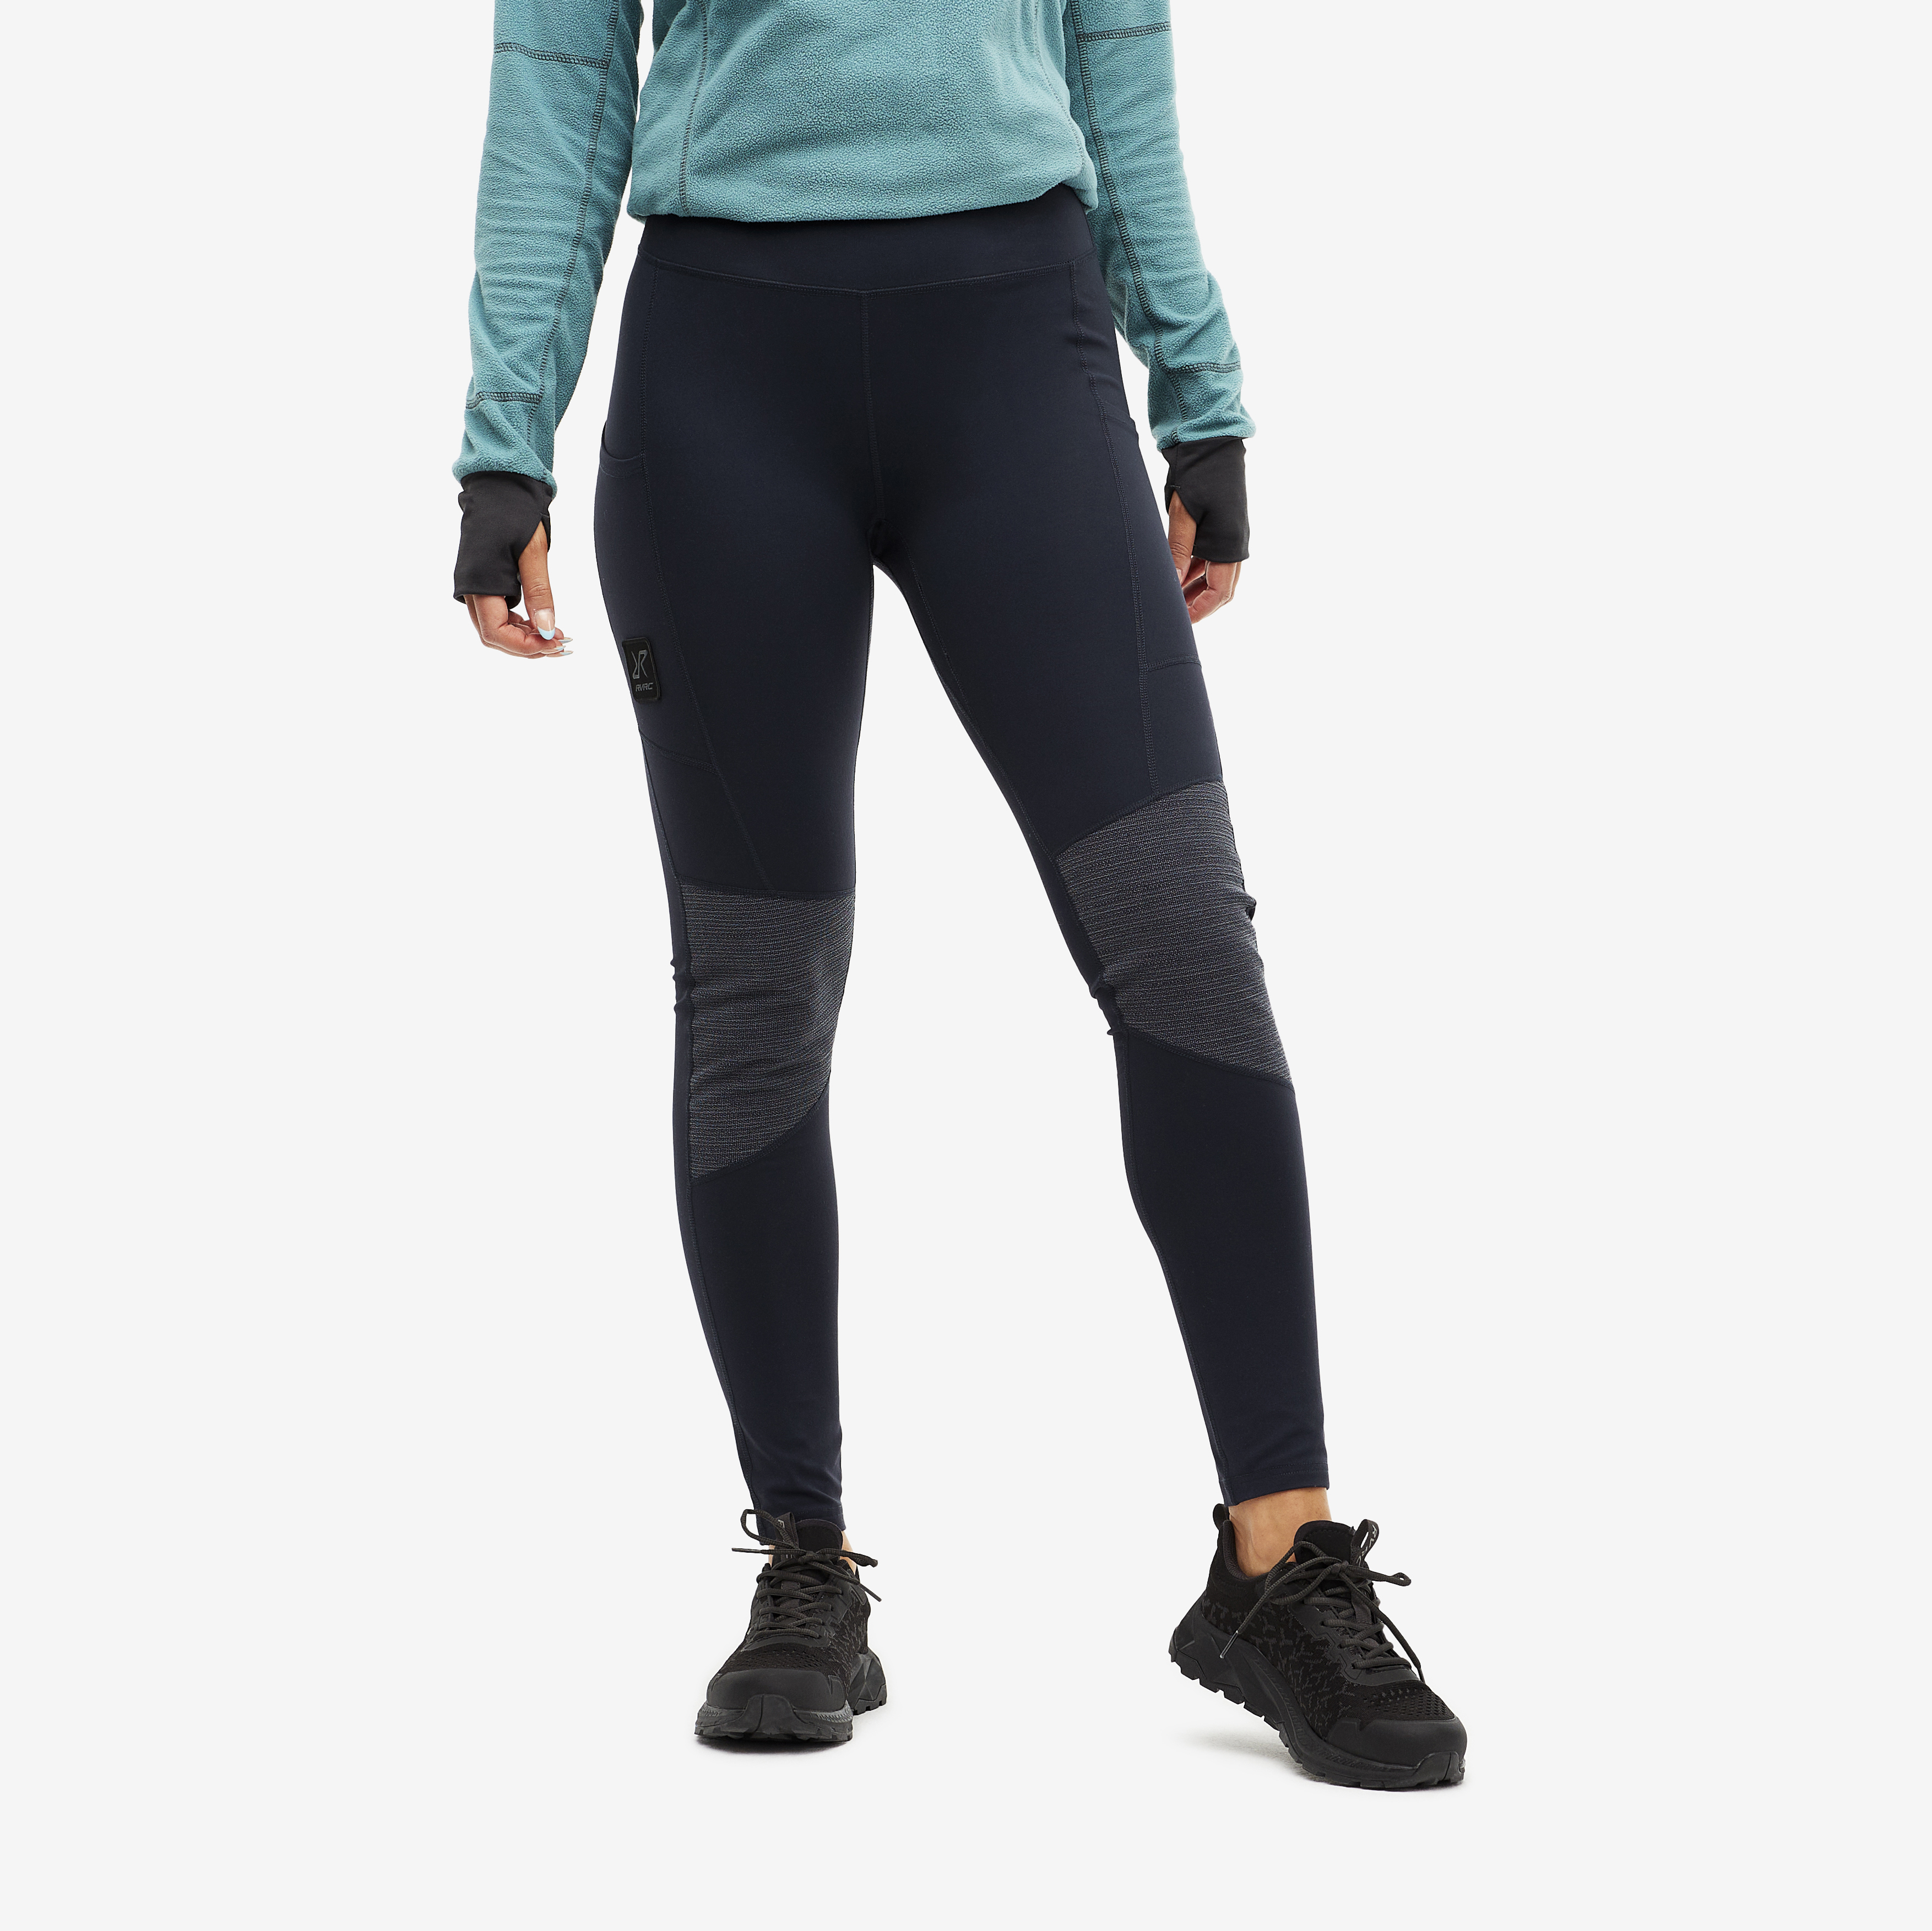 Summit Core Tights - Dam - Peacemaker Blue, Storlek:L - Outdoor Tights